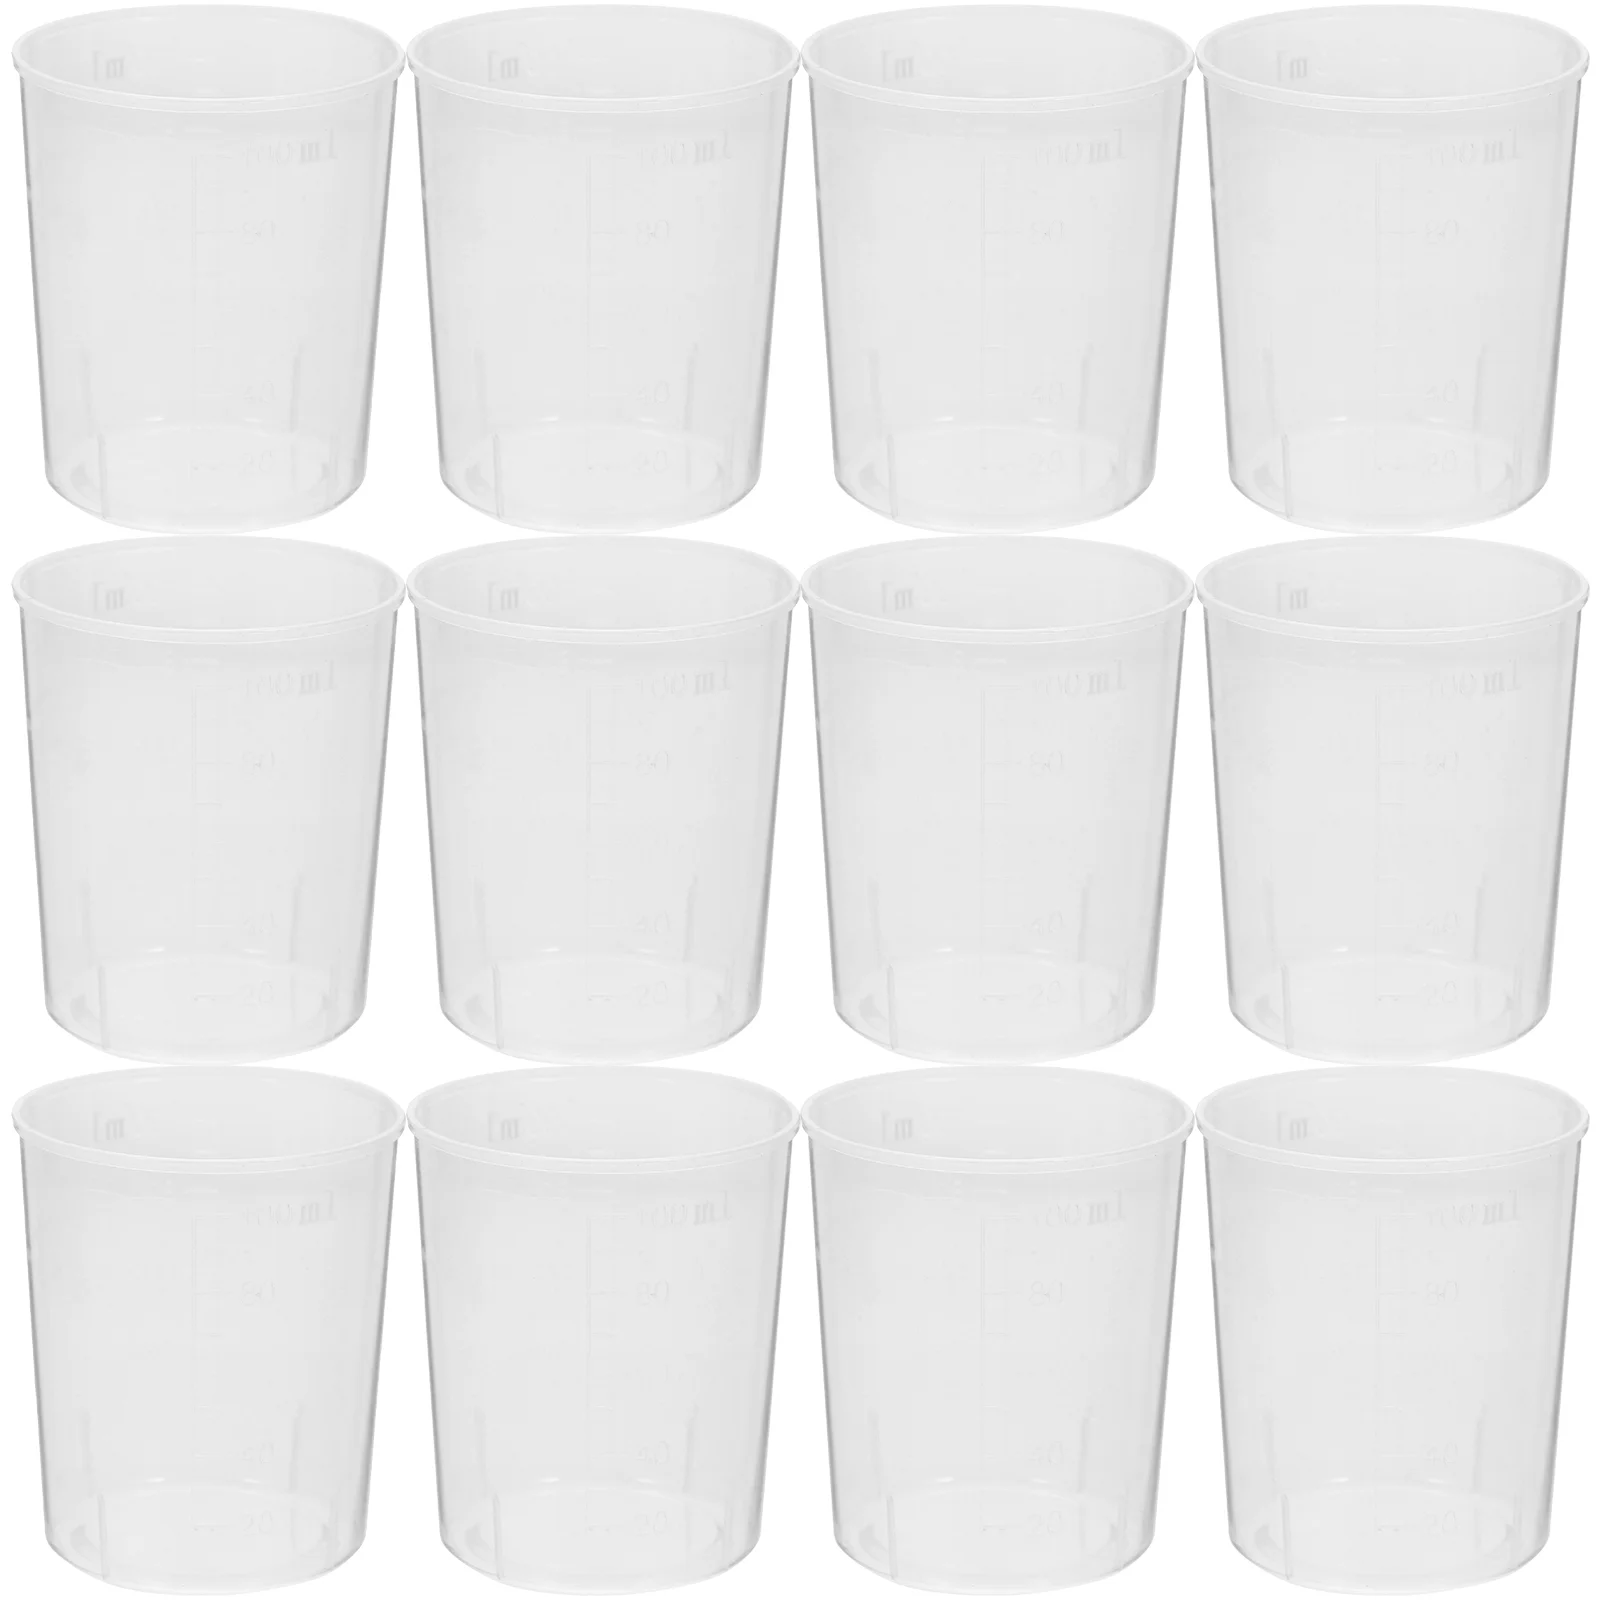 

50Pcs Graduated Cups 100ML Measuring Cup Transparent Scale Graduated Cup Epoxy Measurement Tool for Resin Stain